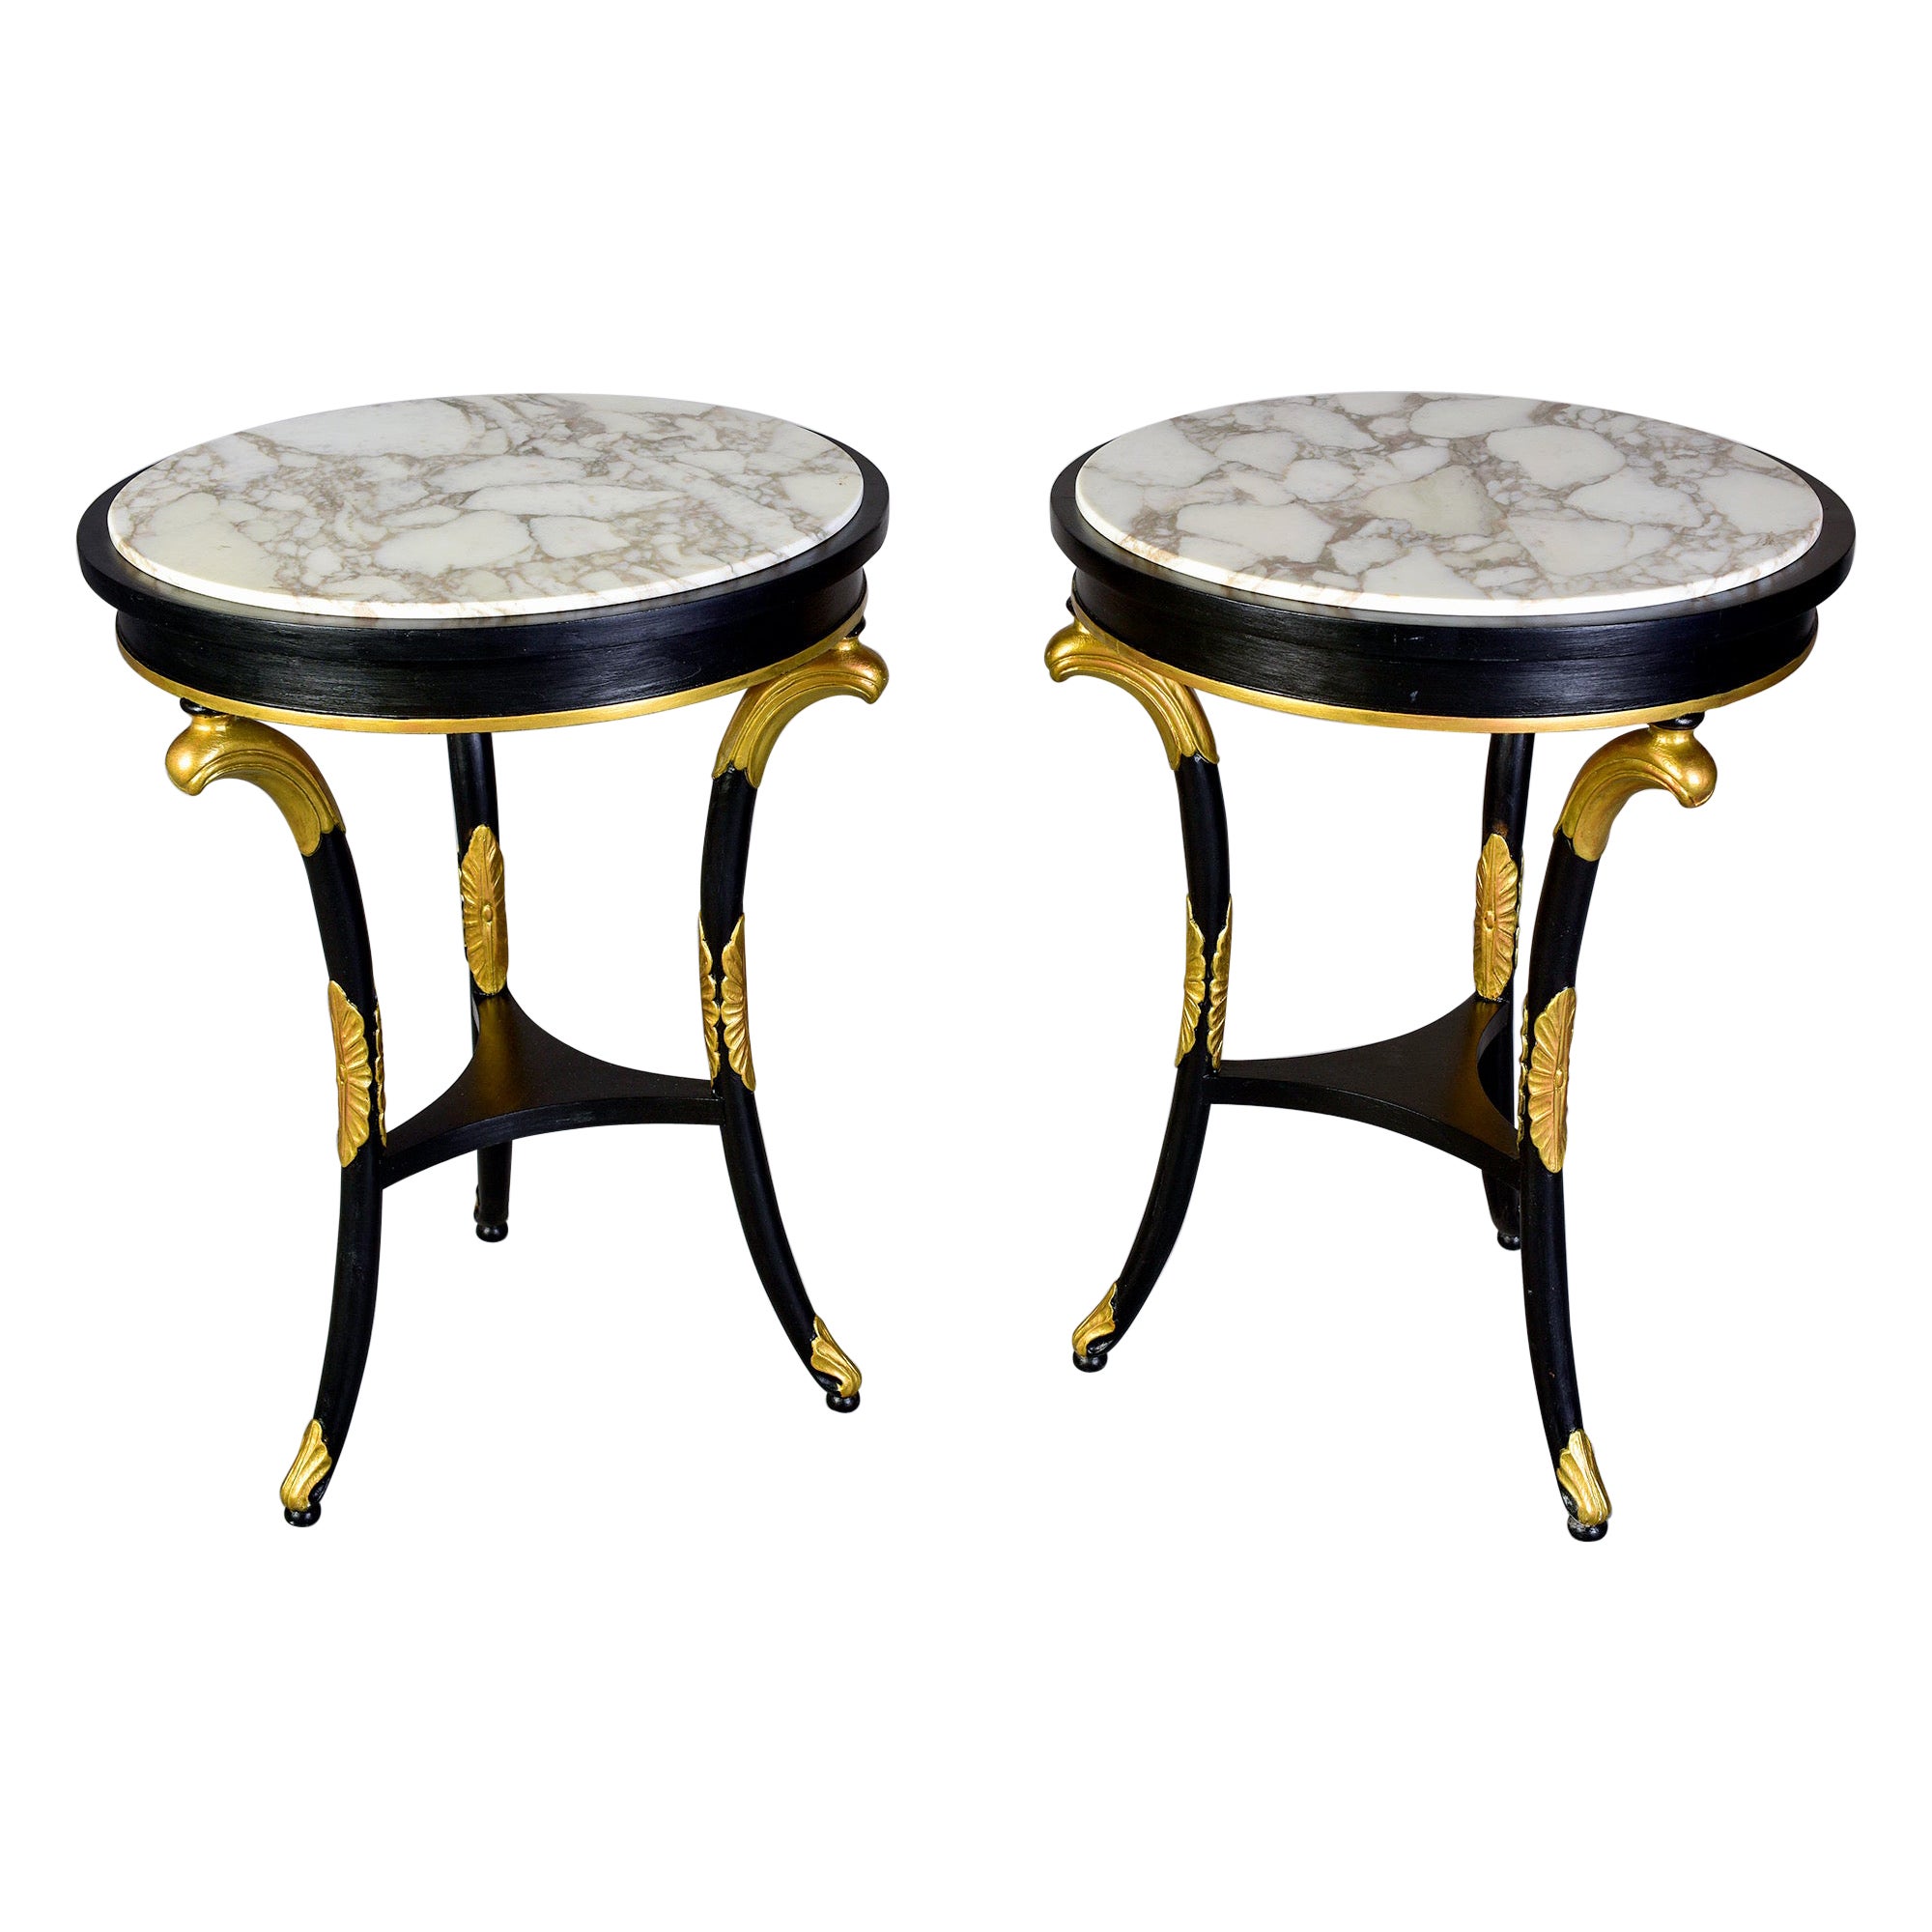 Pair Late 19th C Regency Ebonised Tables with Gilt Wood Fittings and Marble Tops For Sale